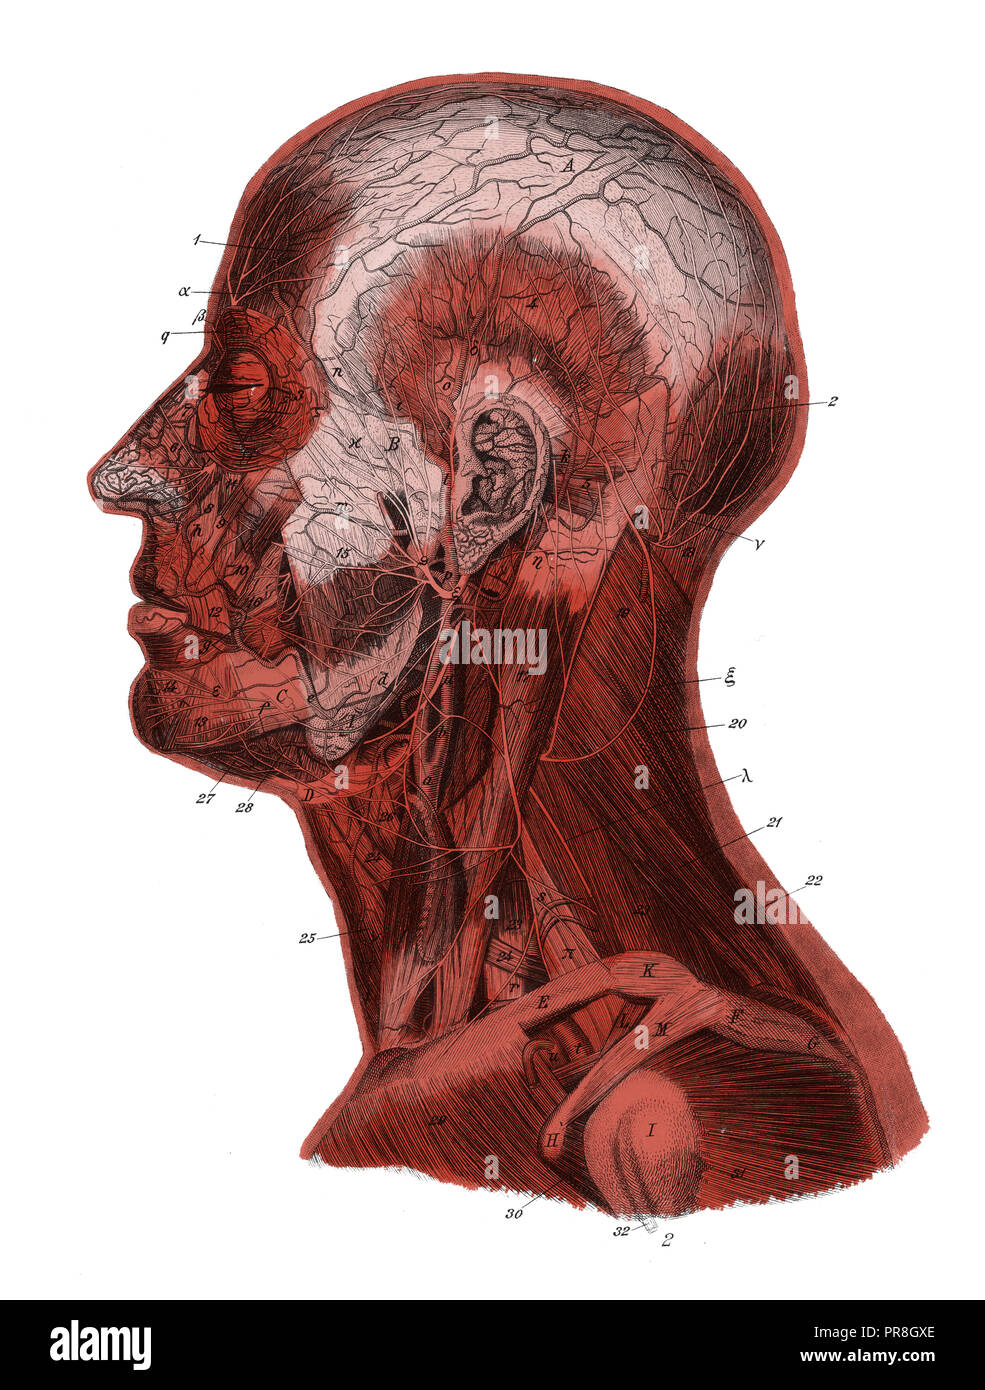 19th century illustration of a human head and neck after removal of skin, the platysma and trapezius muscles. Published in Systematischer Bilder-Atlas Stock Photo